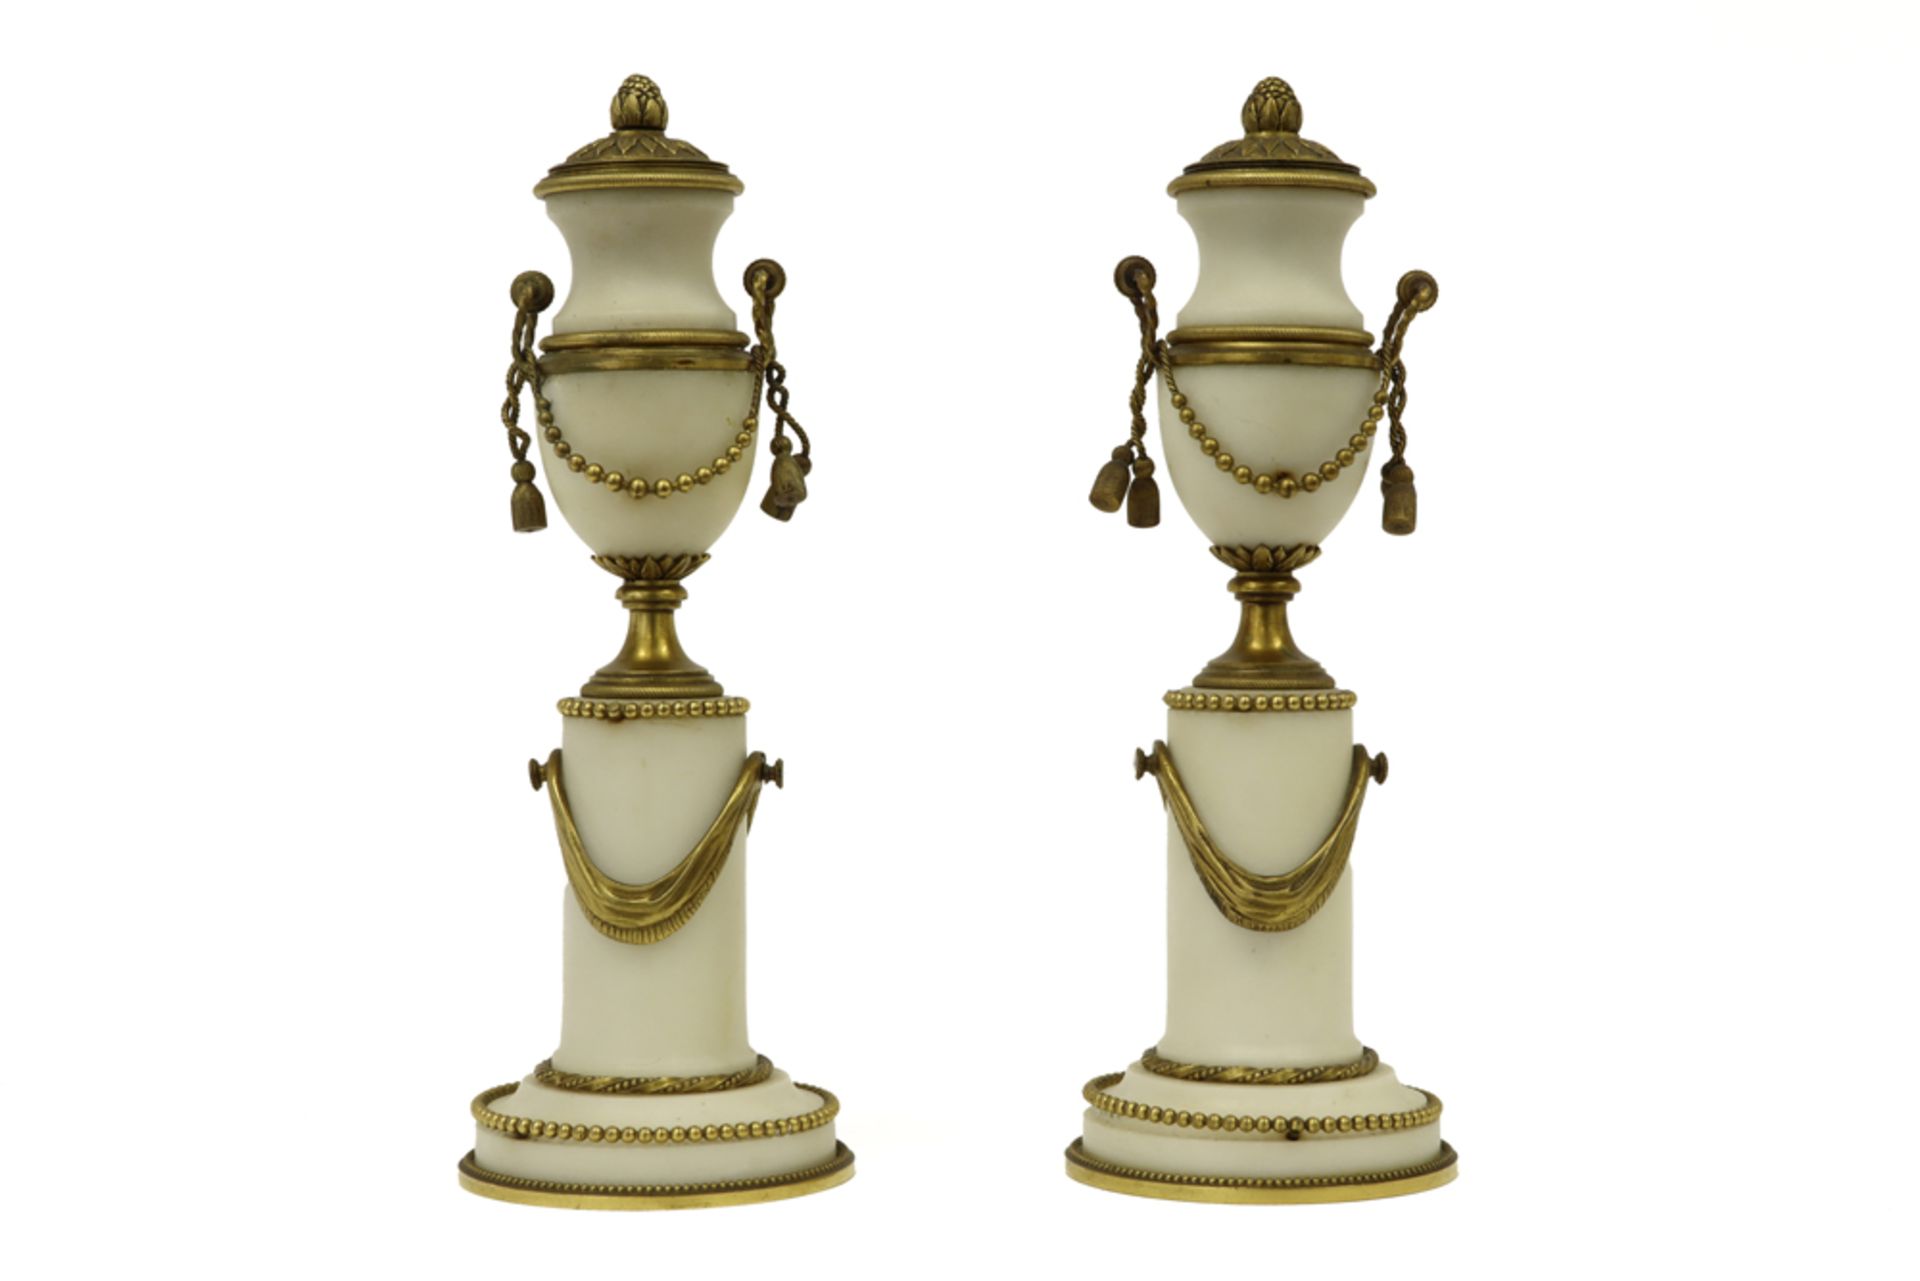 pair of late 18th Cent. Louis XVI style lidded vases on pillar in white marble and gilded bronze||